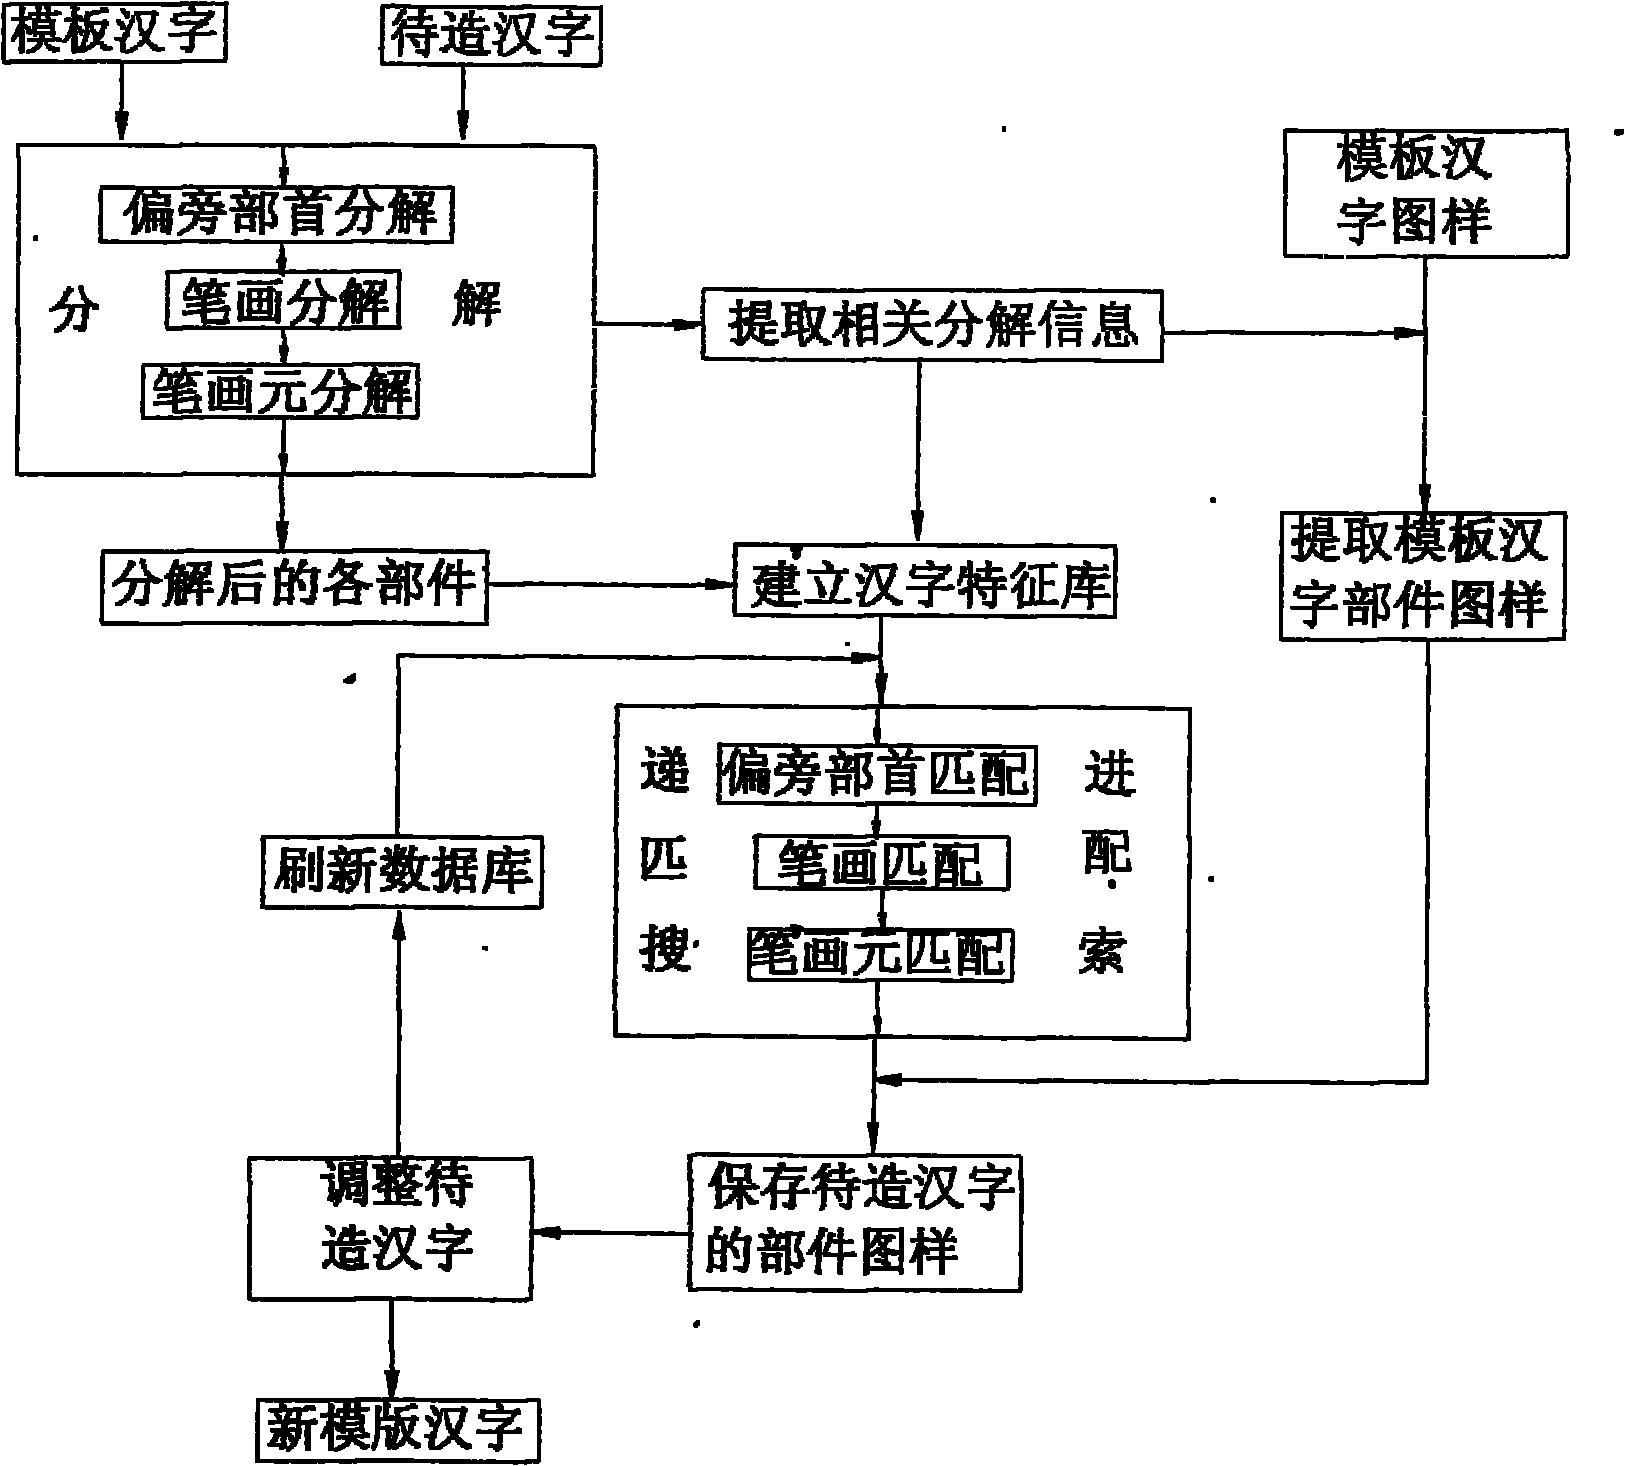 Method for reconstructing Chinese character font